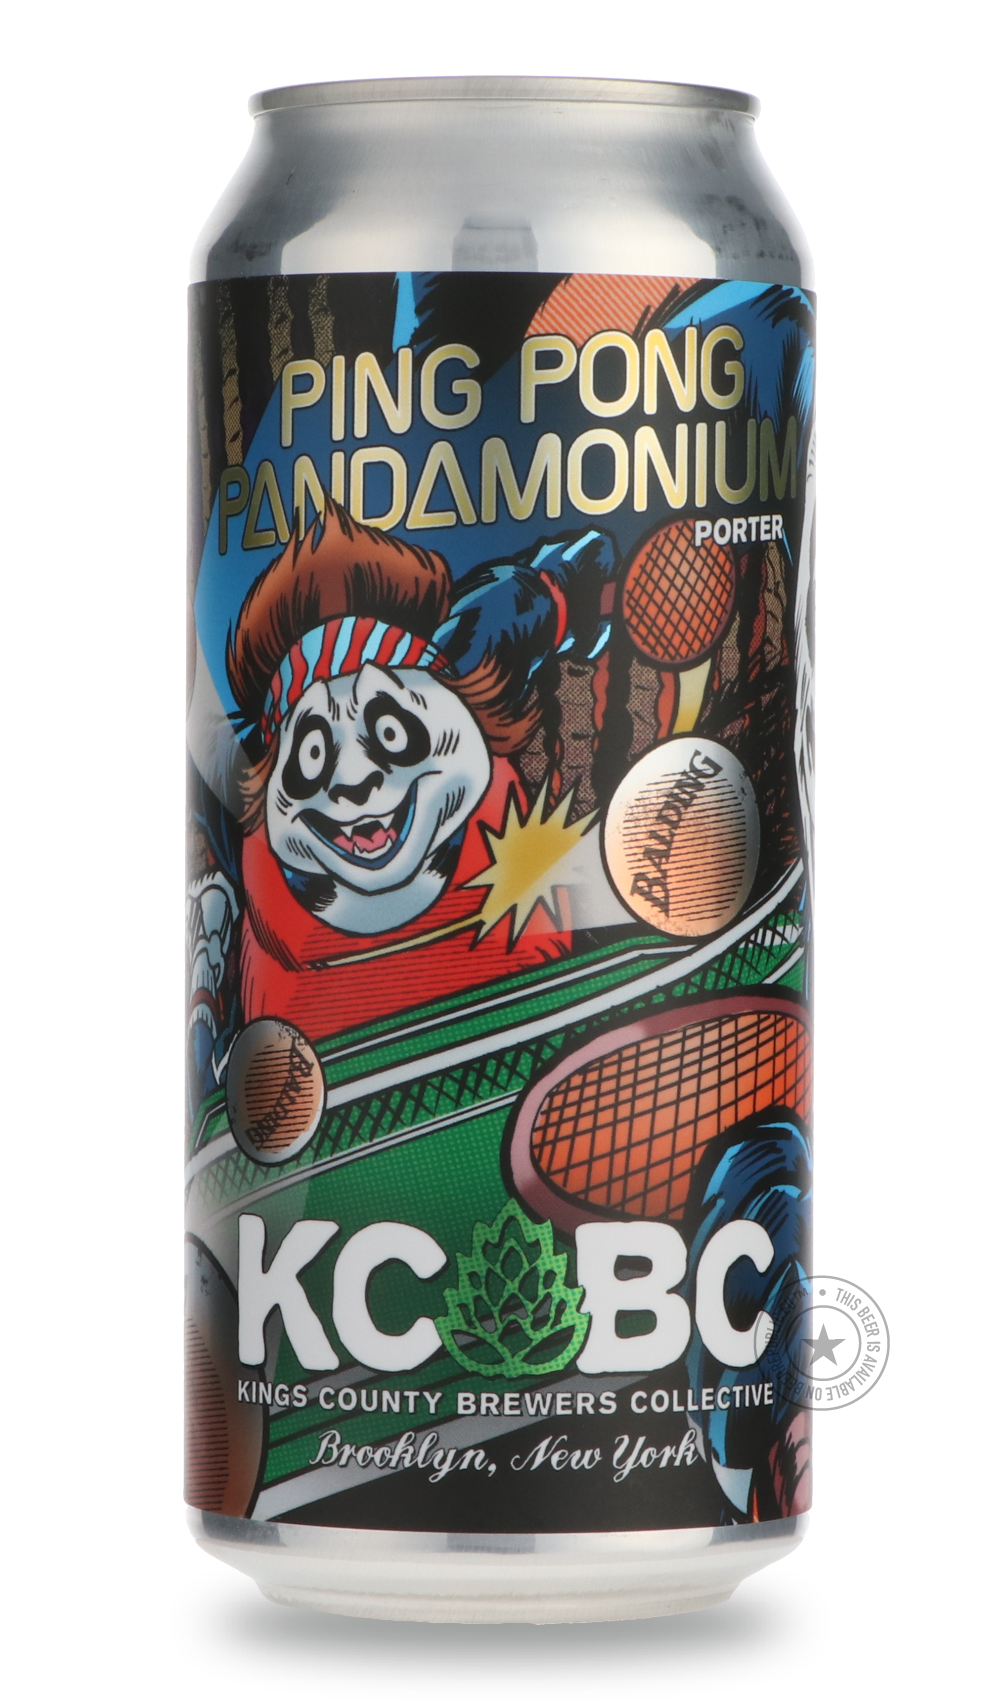 -KCBC- Ping Pong Pandamonium-Stout & Porter- Only @ Beer Republic - The best online beer store for American & Canadian craft beer - Buy beer online from the USA and Canada - Bier online kopen - Amerikaans bier kopen - Craft beer store - Craft beer kopen - Amerikanisch bier kaufen - Bier online kaufen - Acheter biere online - IPA - Stout - Porter - New England IPA - Hazy IPA - Imperial Stout - Barrel Aged - Barrel Aged Imperial Stout - Brown - Dark beer - Blond - Blonde - Pilsner - Lager - Wheat - Weizen - A